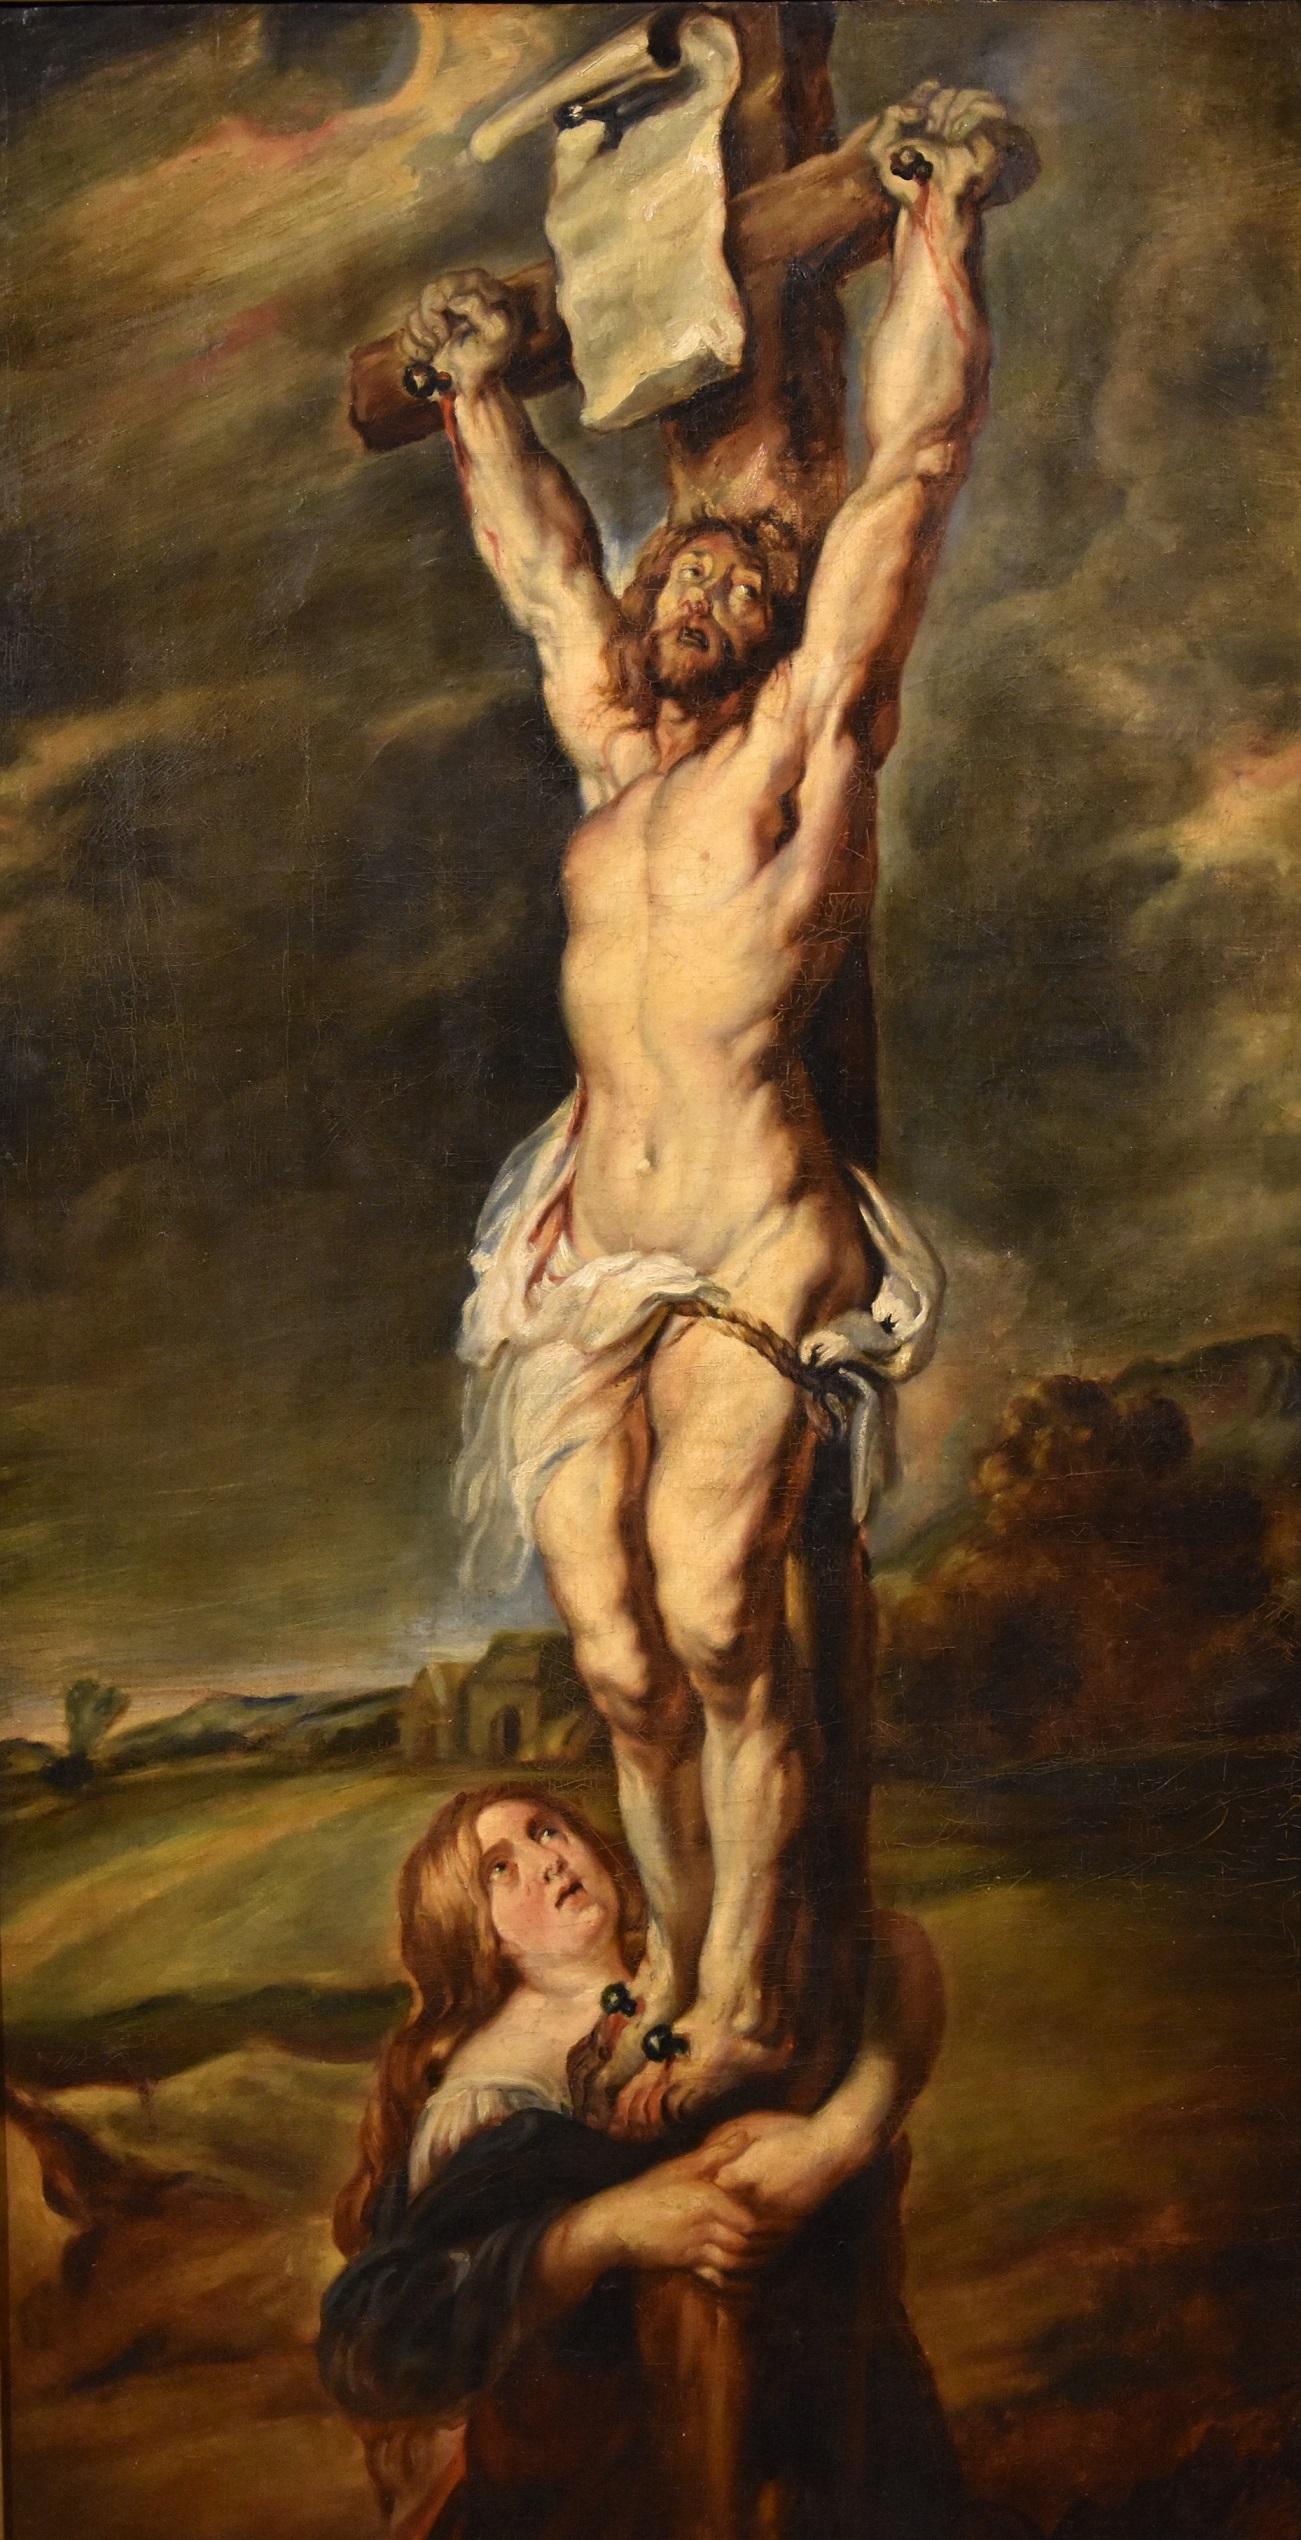 Peter Paul Rubens (Siegen 1577 - Antwerp 1640) Portrait Painting - Christ Crucified Rubens Paint Oil on canvas Old master 17th Century Religious